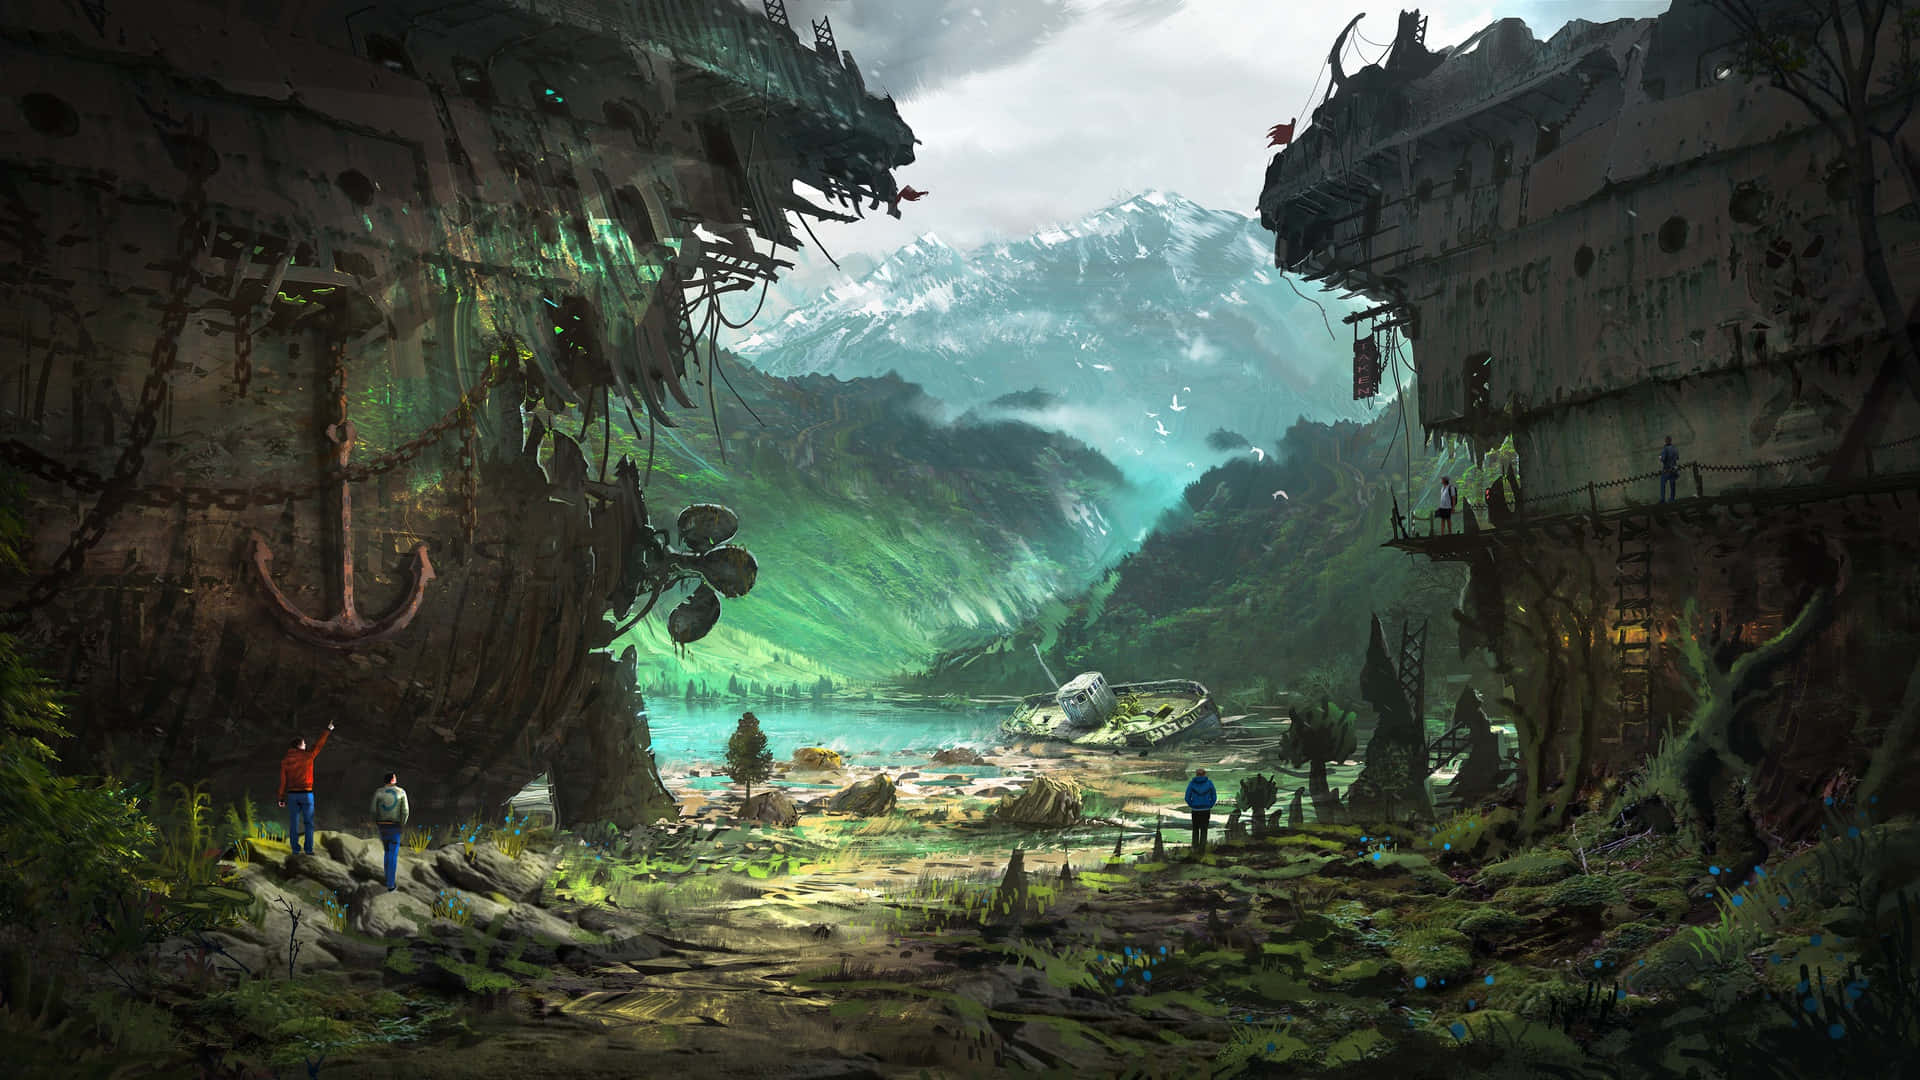 Nature reclaims the land in a post-apocalyptic world Wallpaper